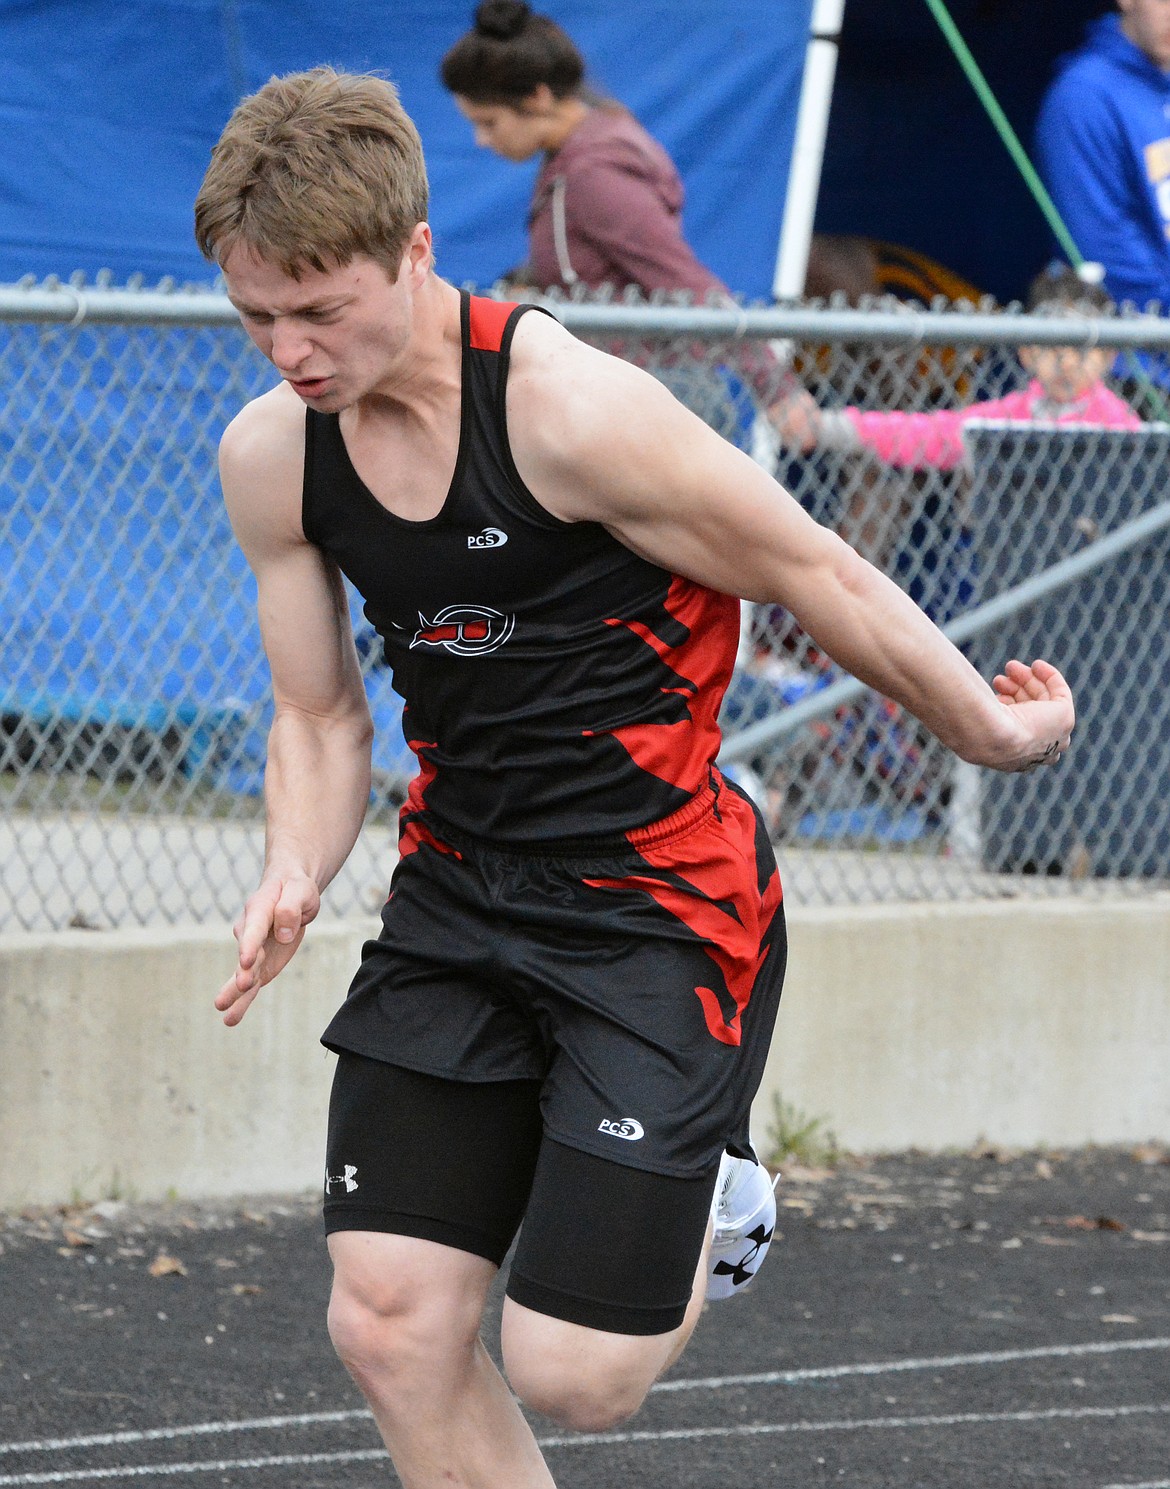 Trevor Paro of Hot Springs was in action at the Ronan Track Meet this weekend. (Jason Blasco/Clark Fork Valley Press)